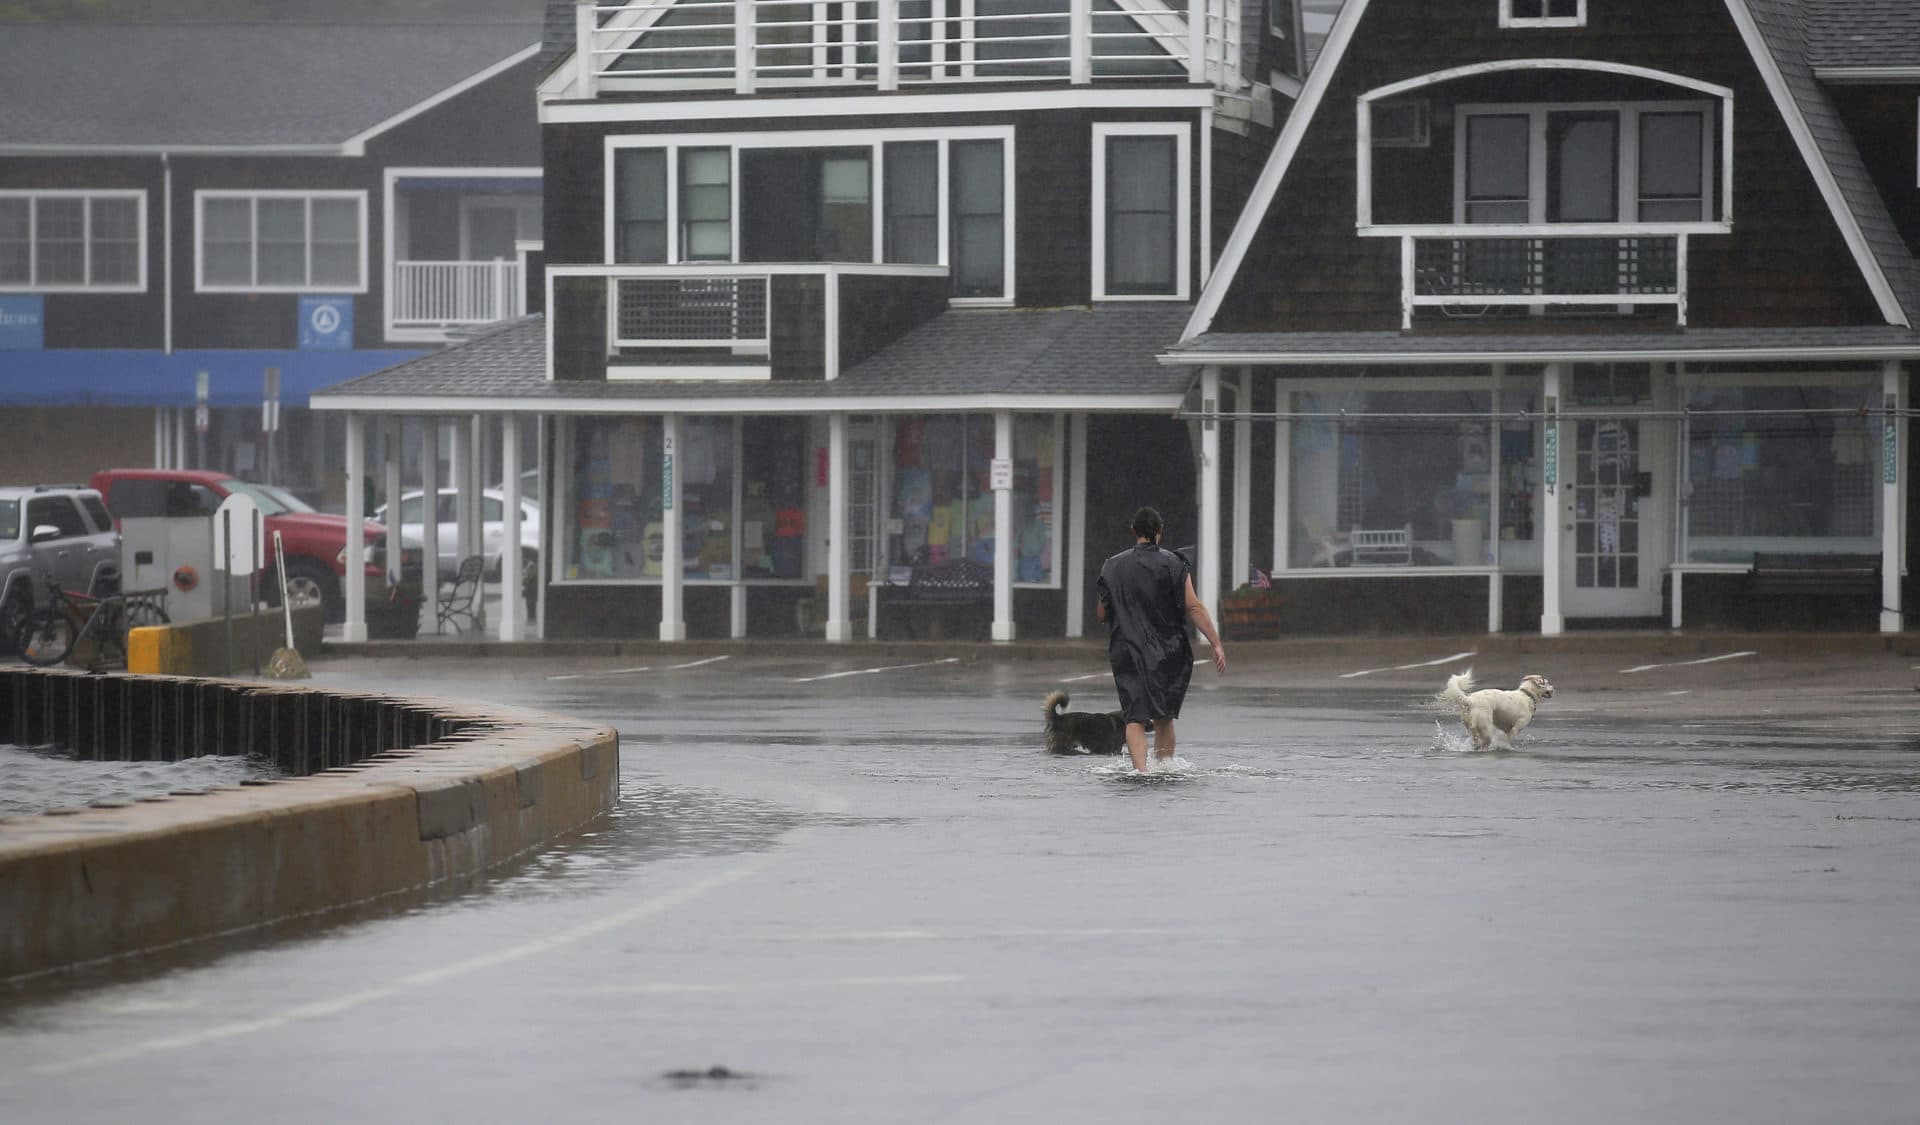 An unidentified man walks his dogs through a flooded parking lot in the Watch Hill section of Westerly, R.I., after Tropical Storm Henri made landfall, Aug. 22, 2021. (Stew Milne/AP)